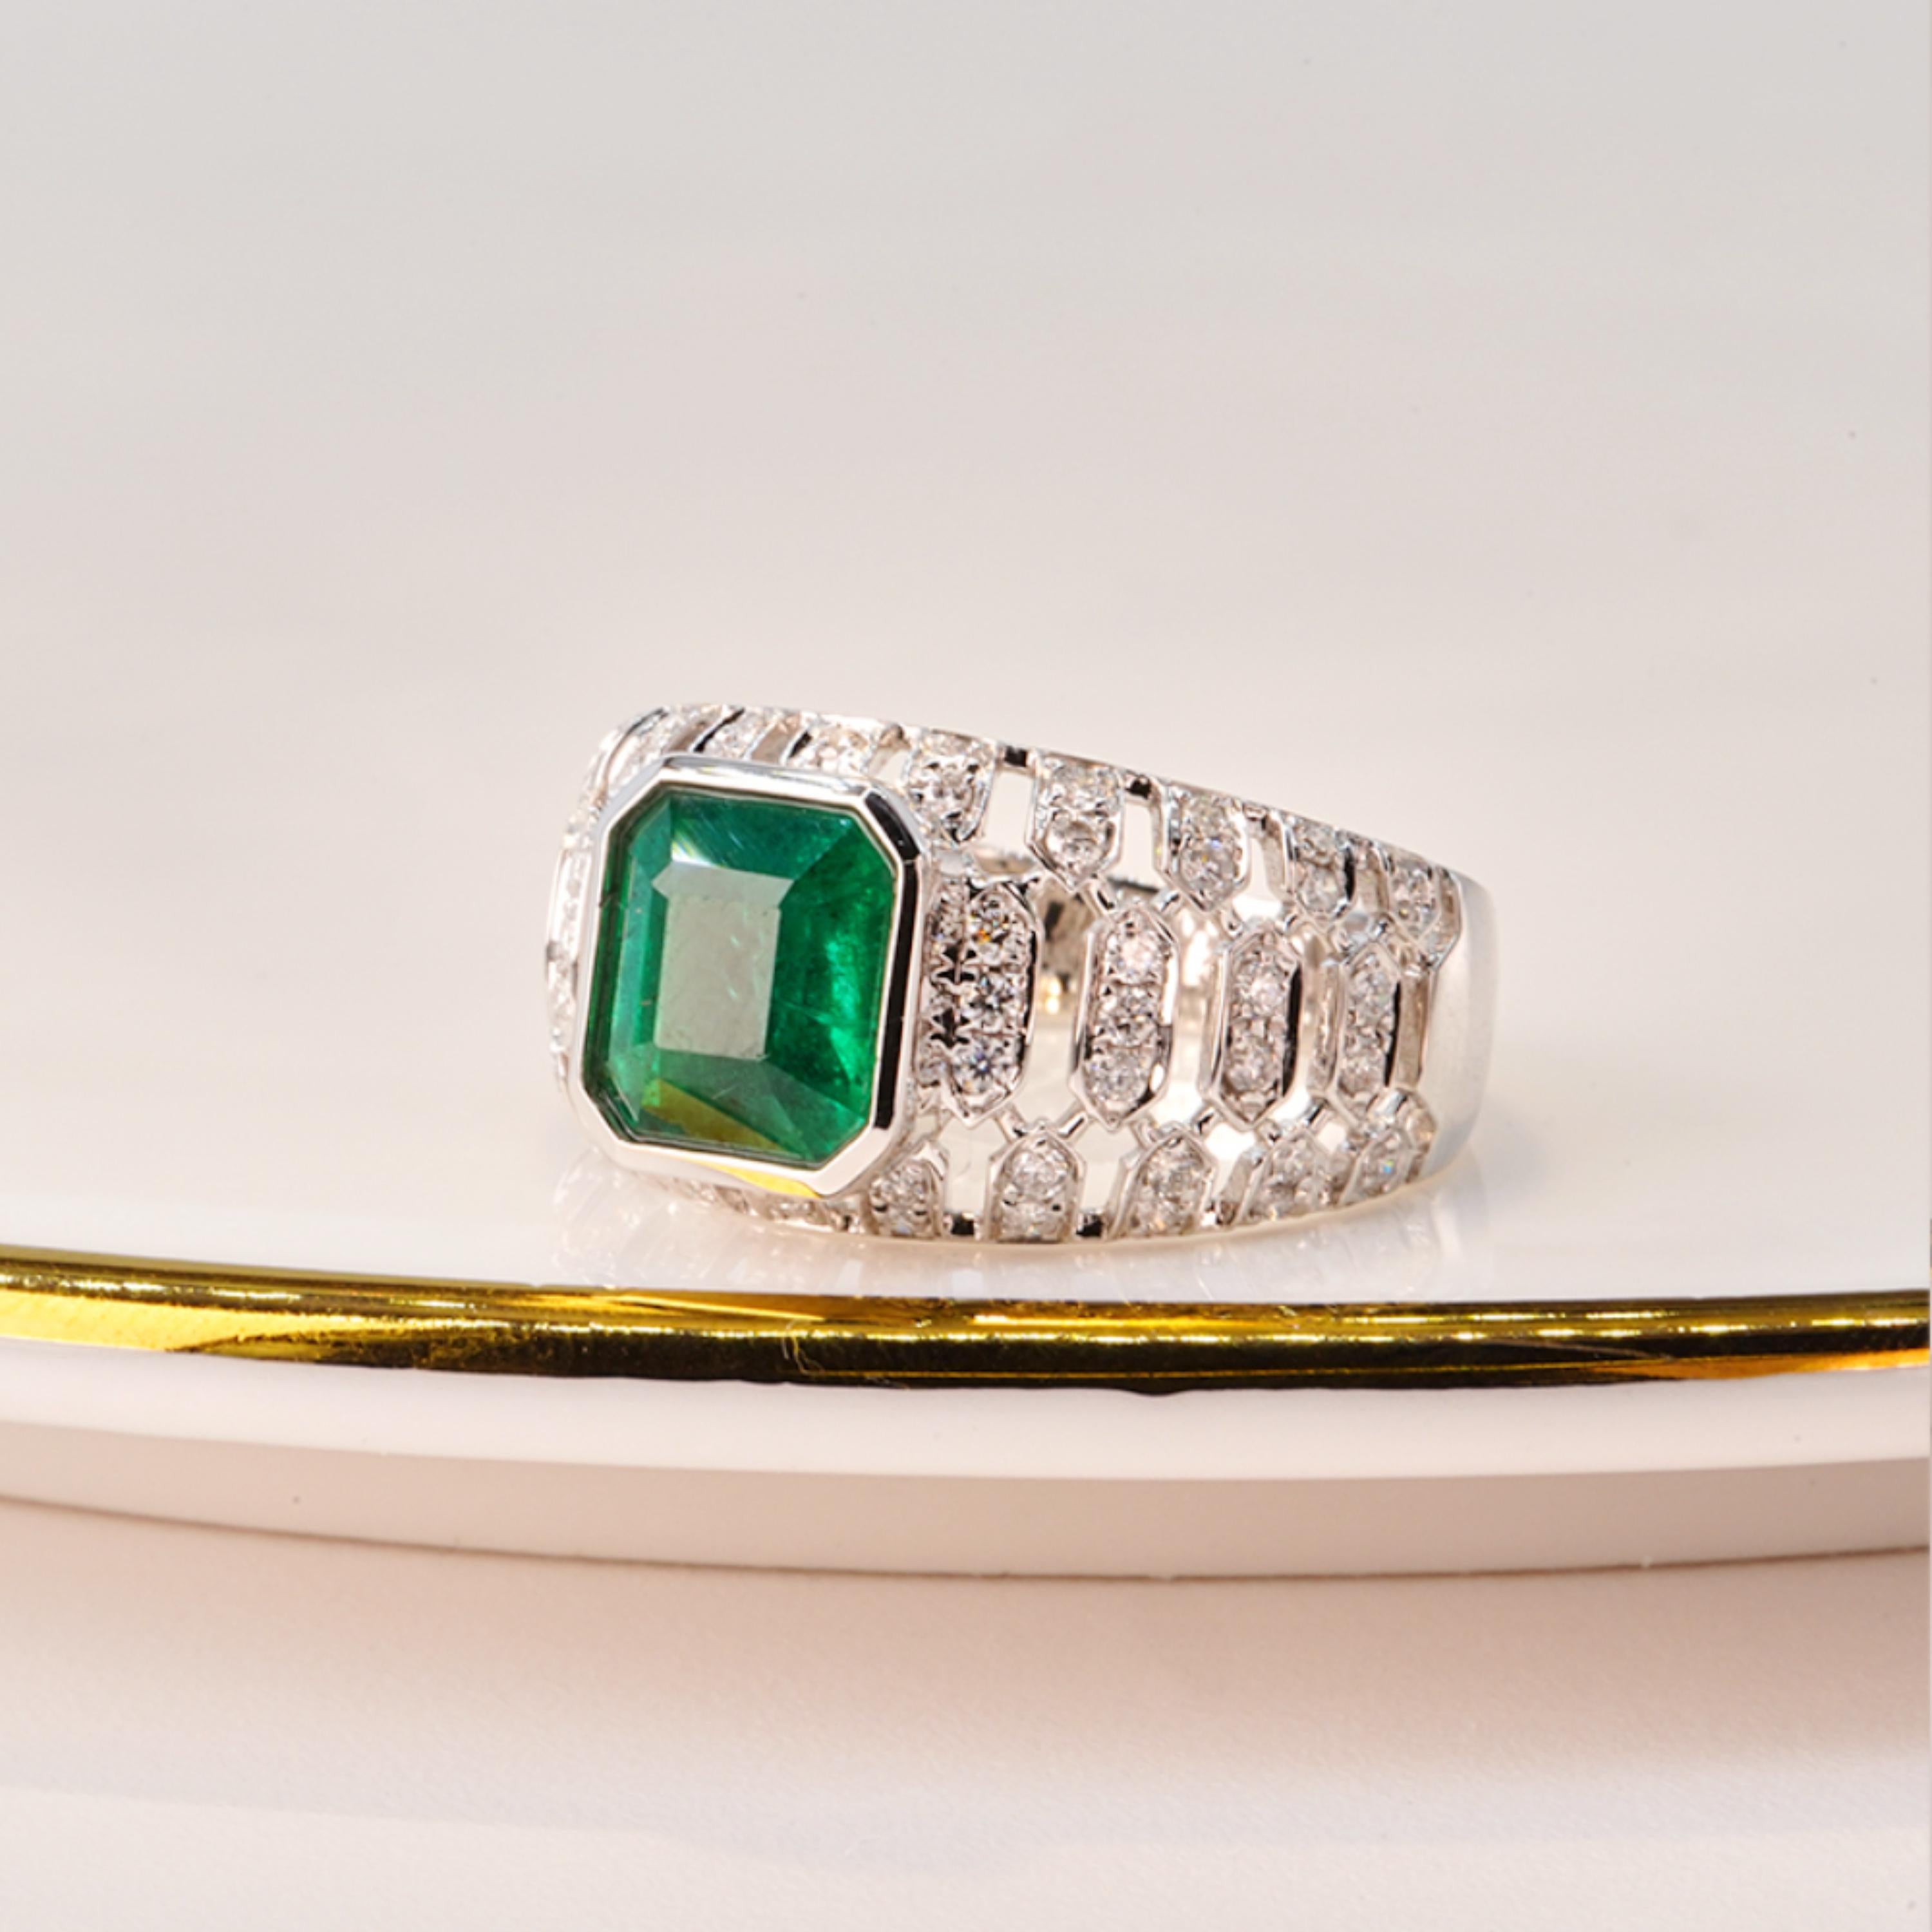 Certified 2 Natural Emerald Diamond White Gold Half Eternity Engagement Band

A stunning ring featuring IGI/GIA Certified 2.12 Carat Natural Emerald and 0.68 Carat of Diamond Accents set in 18K Solid Gold.

Emeralds are highly valued for their